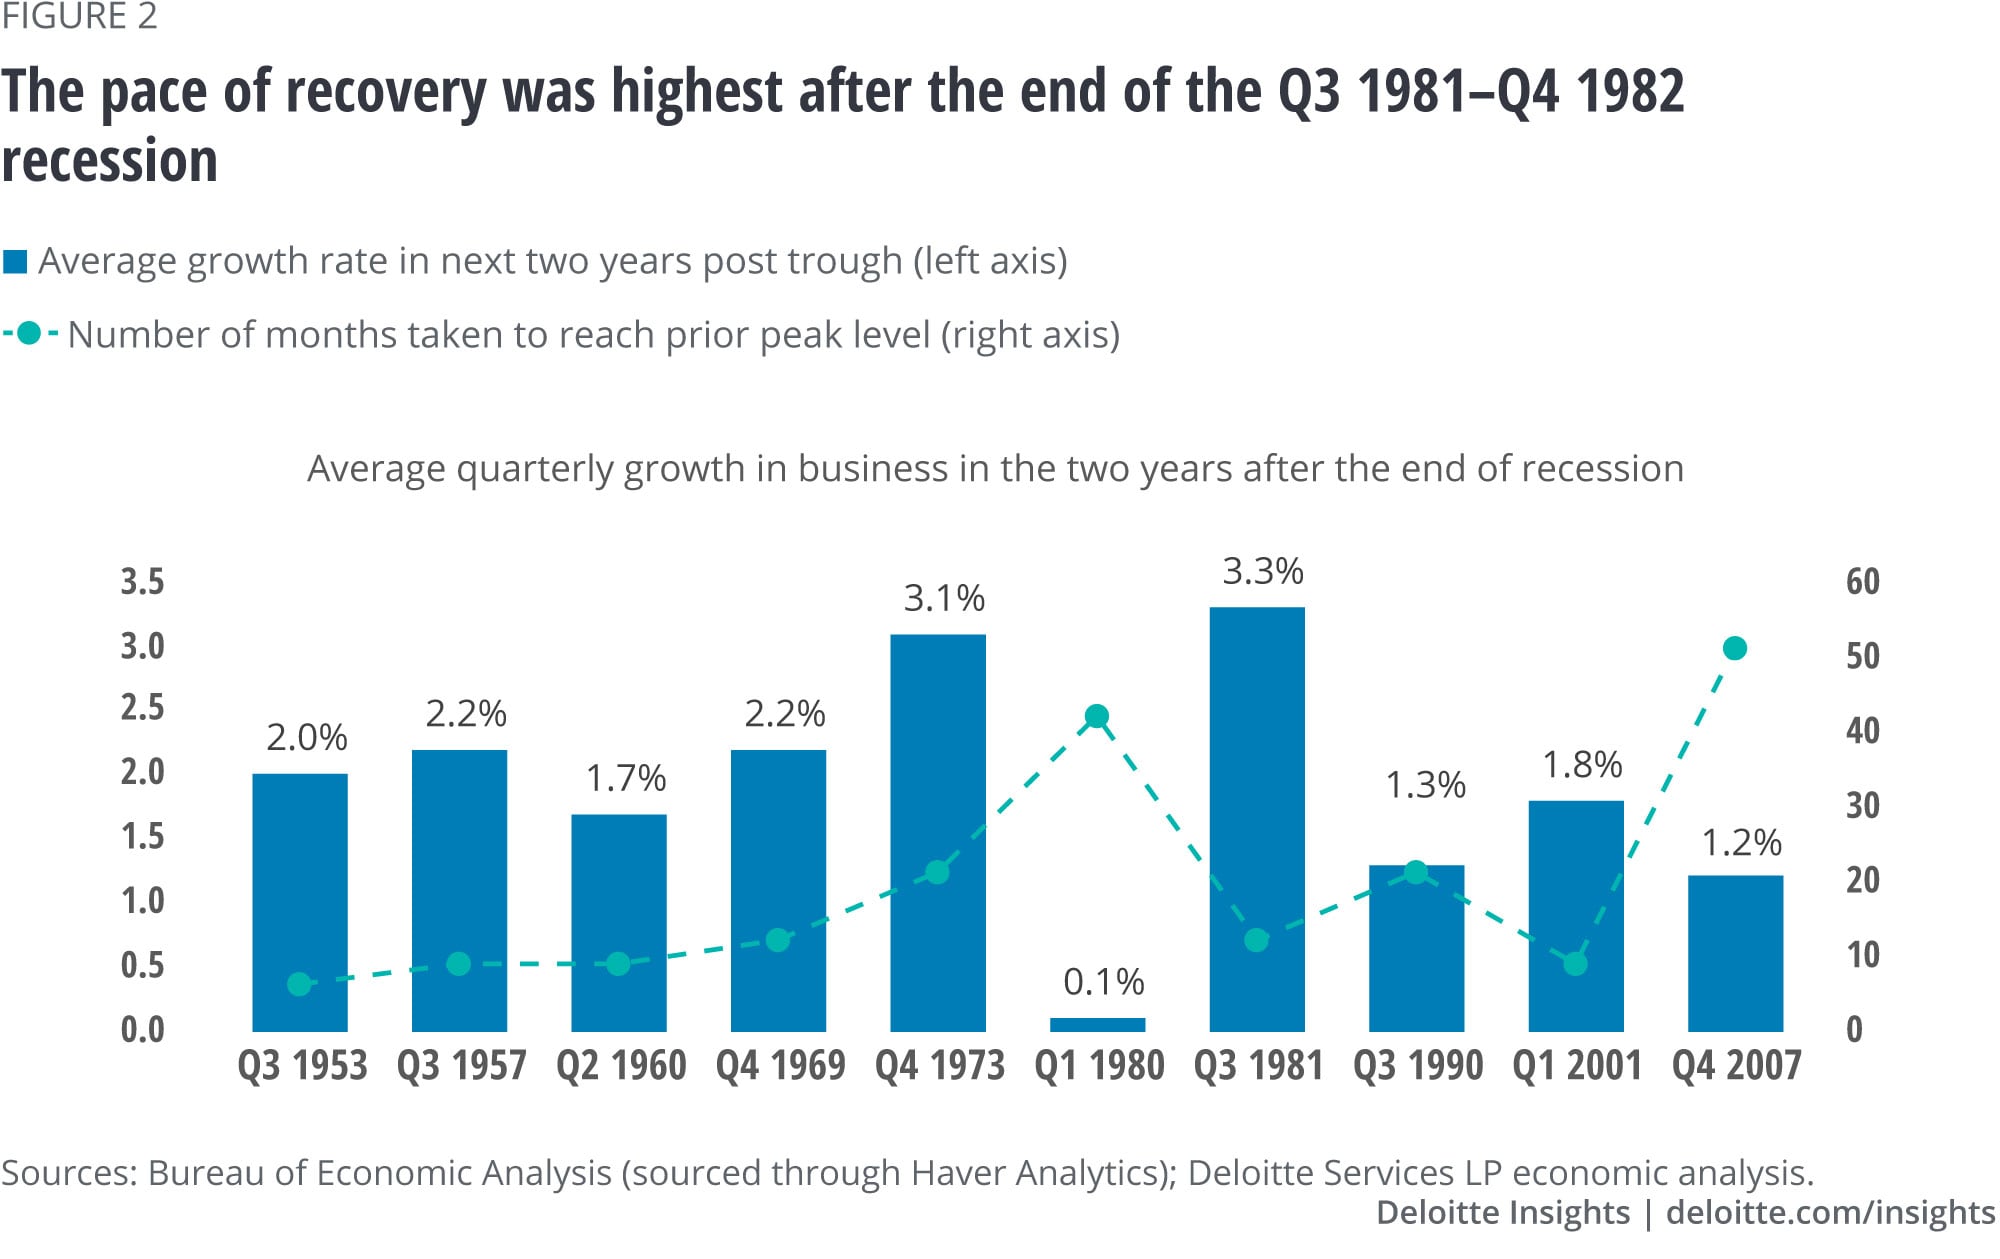 The pace of recovery was the highest after the end of the recession in Q3 1981- Q4 1982